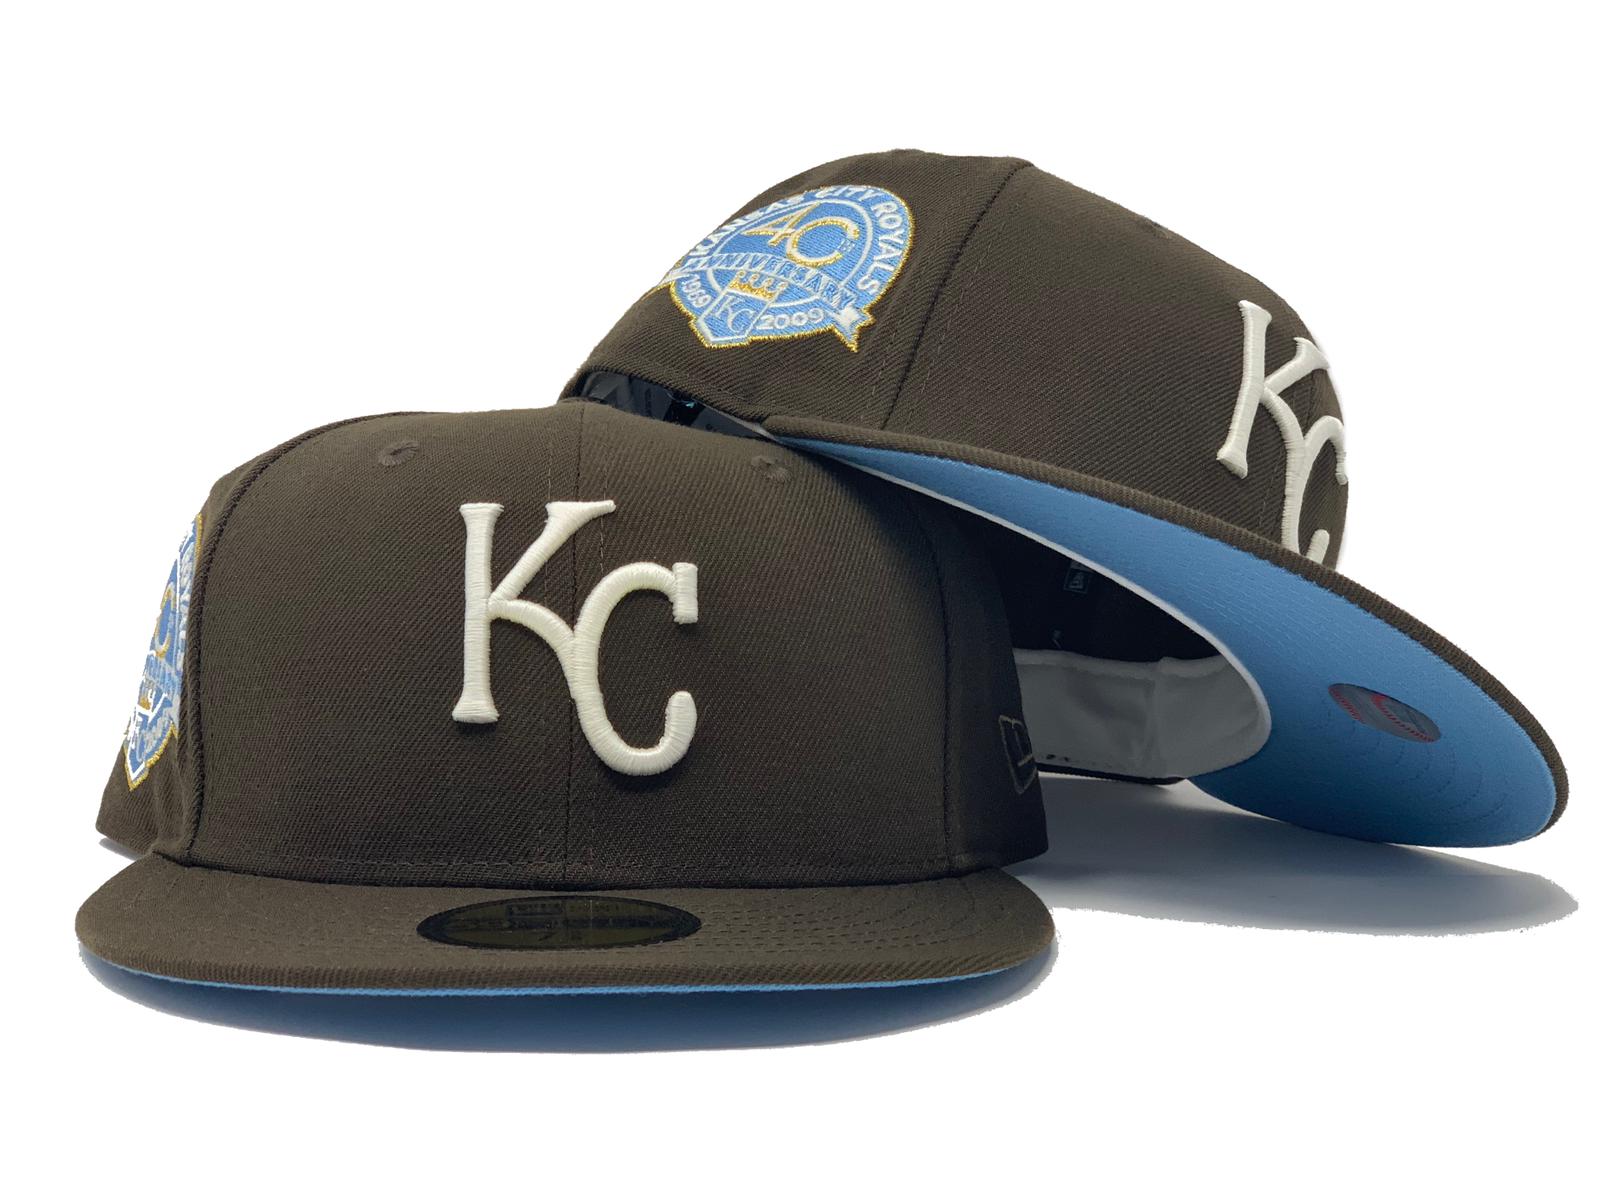 Kansas City Royals - Gear up for the new season with 40% off at the Royals  Team Store on Black Friday! royals.com/teamstore